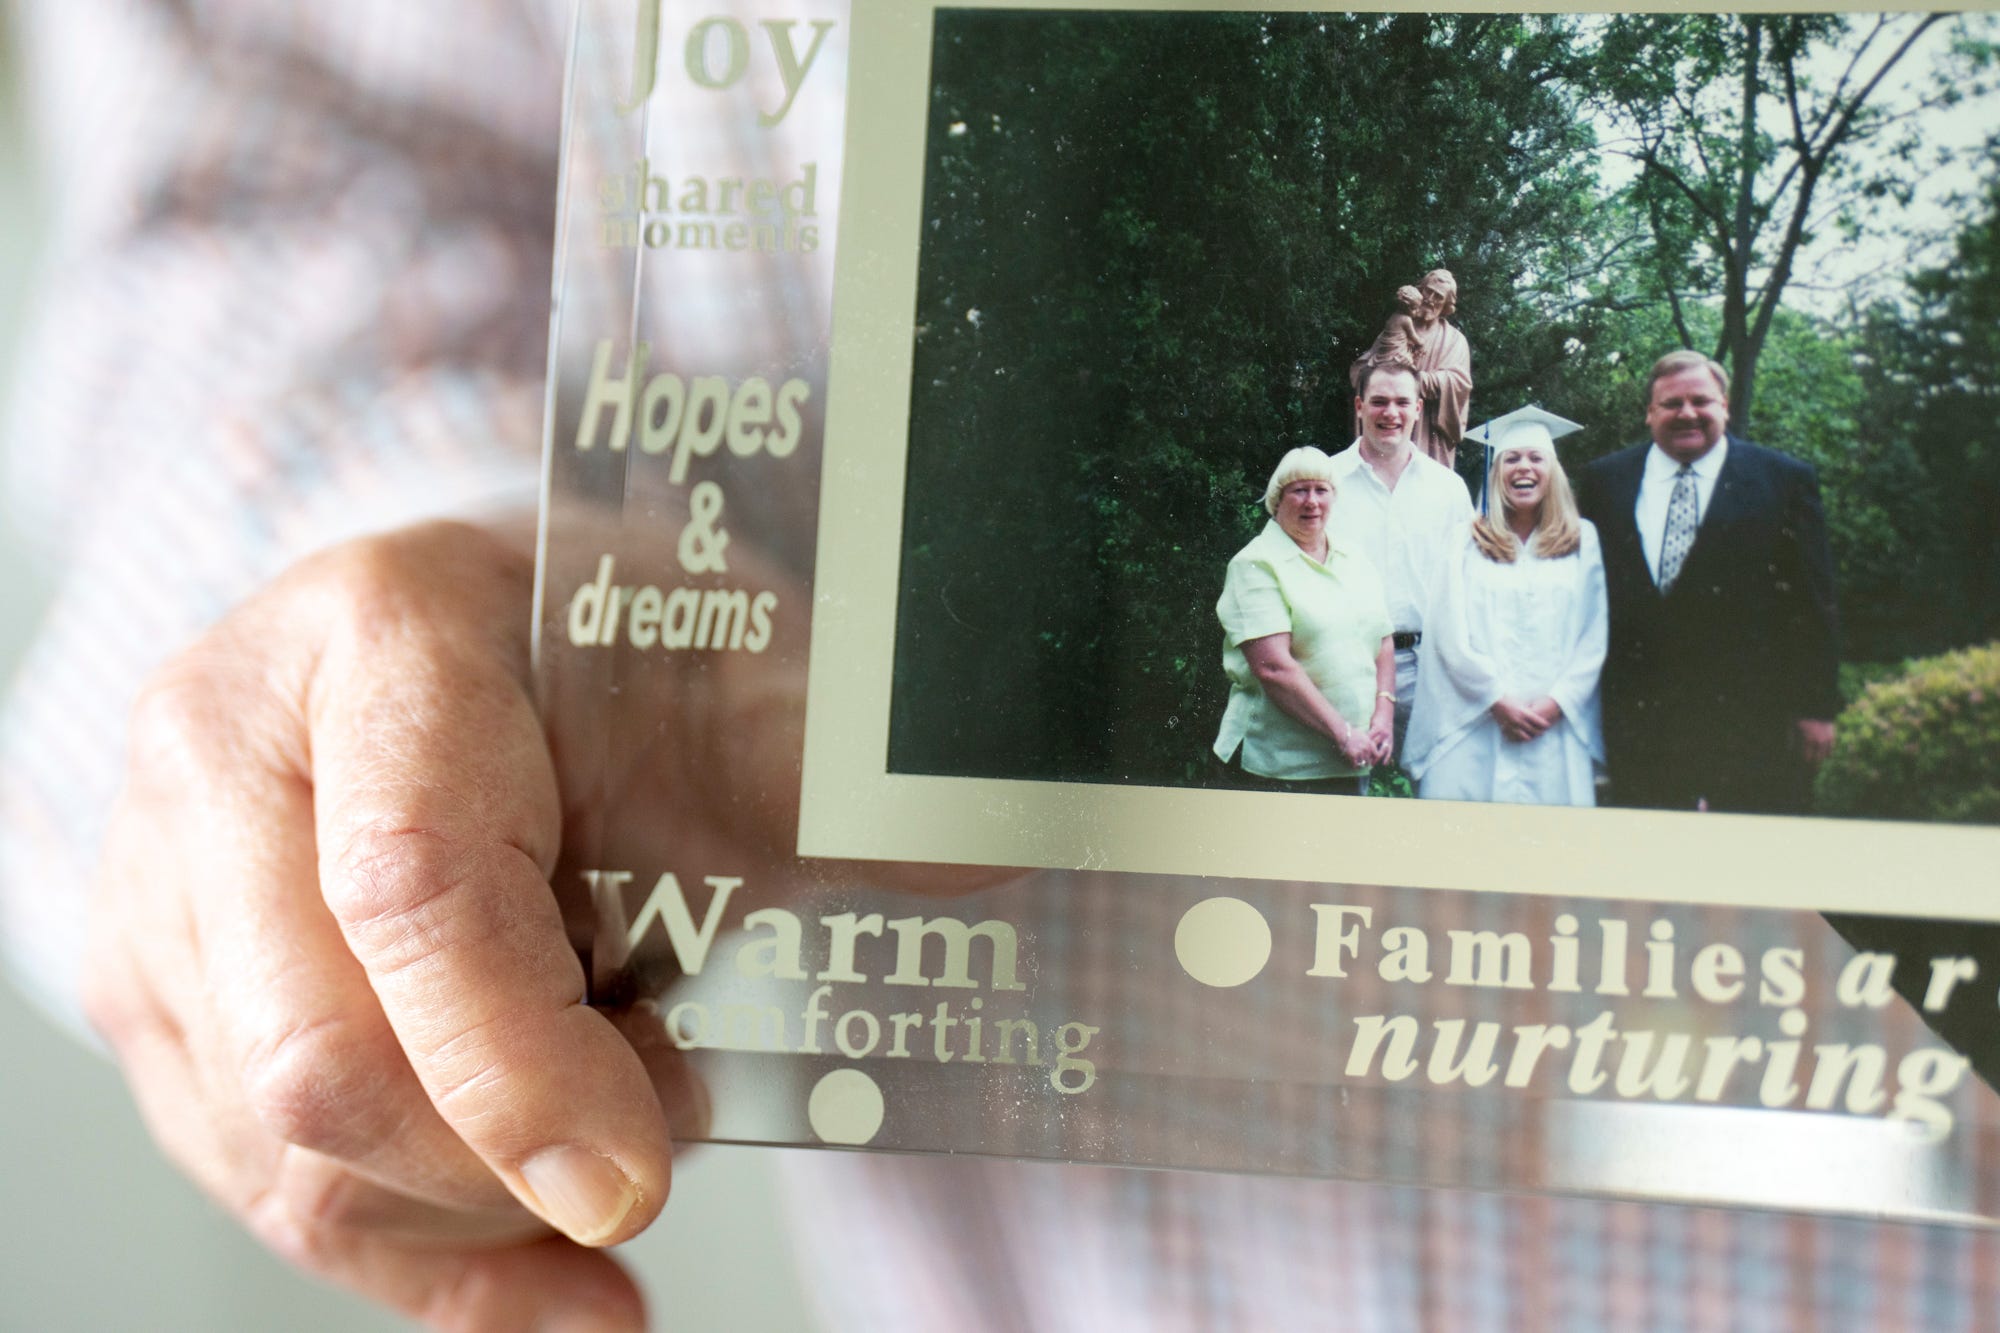 Dan Neyer holds a family portrait, from left, his wife, Chris, his son, Paul, and daughter, Kristy, taken on his daughters graduation in 2000. Paul Neyer, whose decision to come forward after almost 30 years sent Fr. Geoff Drew to prison.